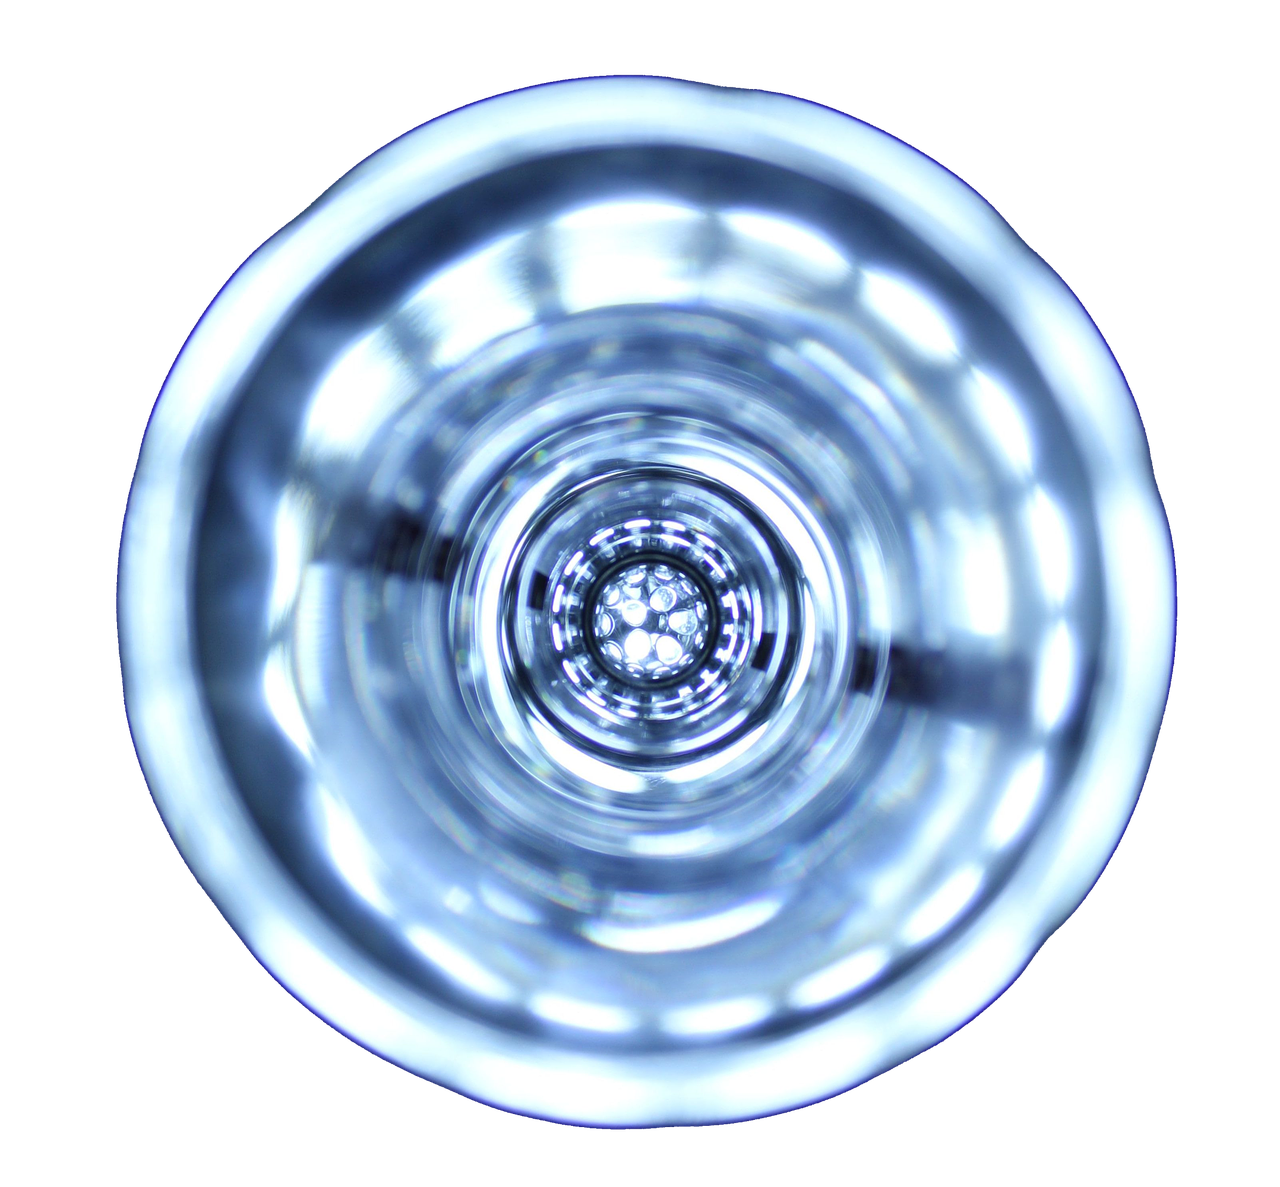 a close up view of a glass of water, a microscopic photo, abstract illusionism, singular light source from below, key is on the center of image, hypnosis, modern high sharpness photo